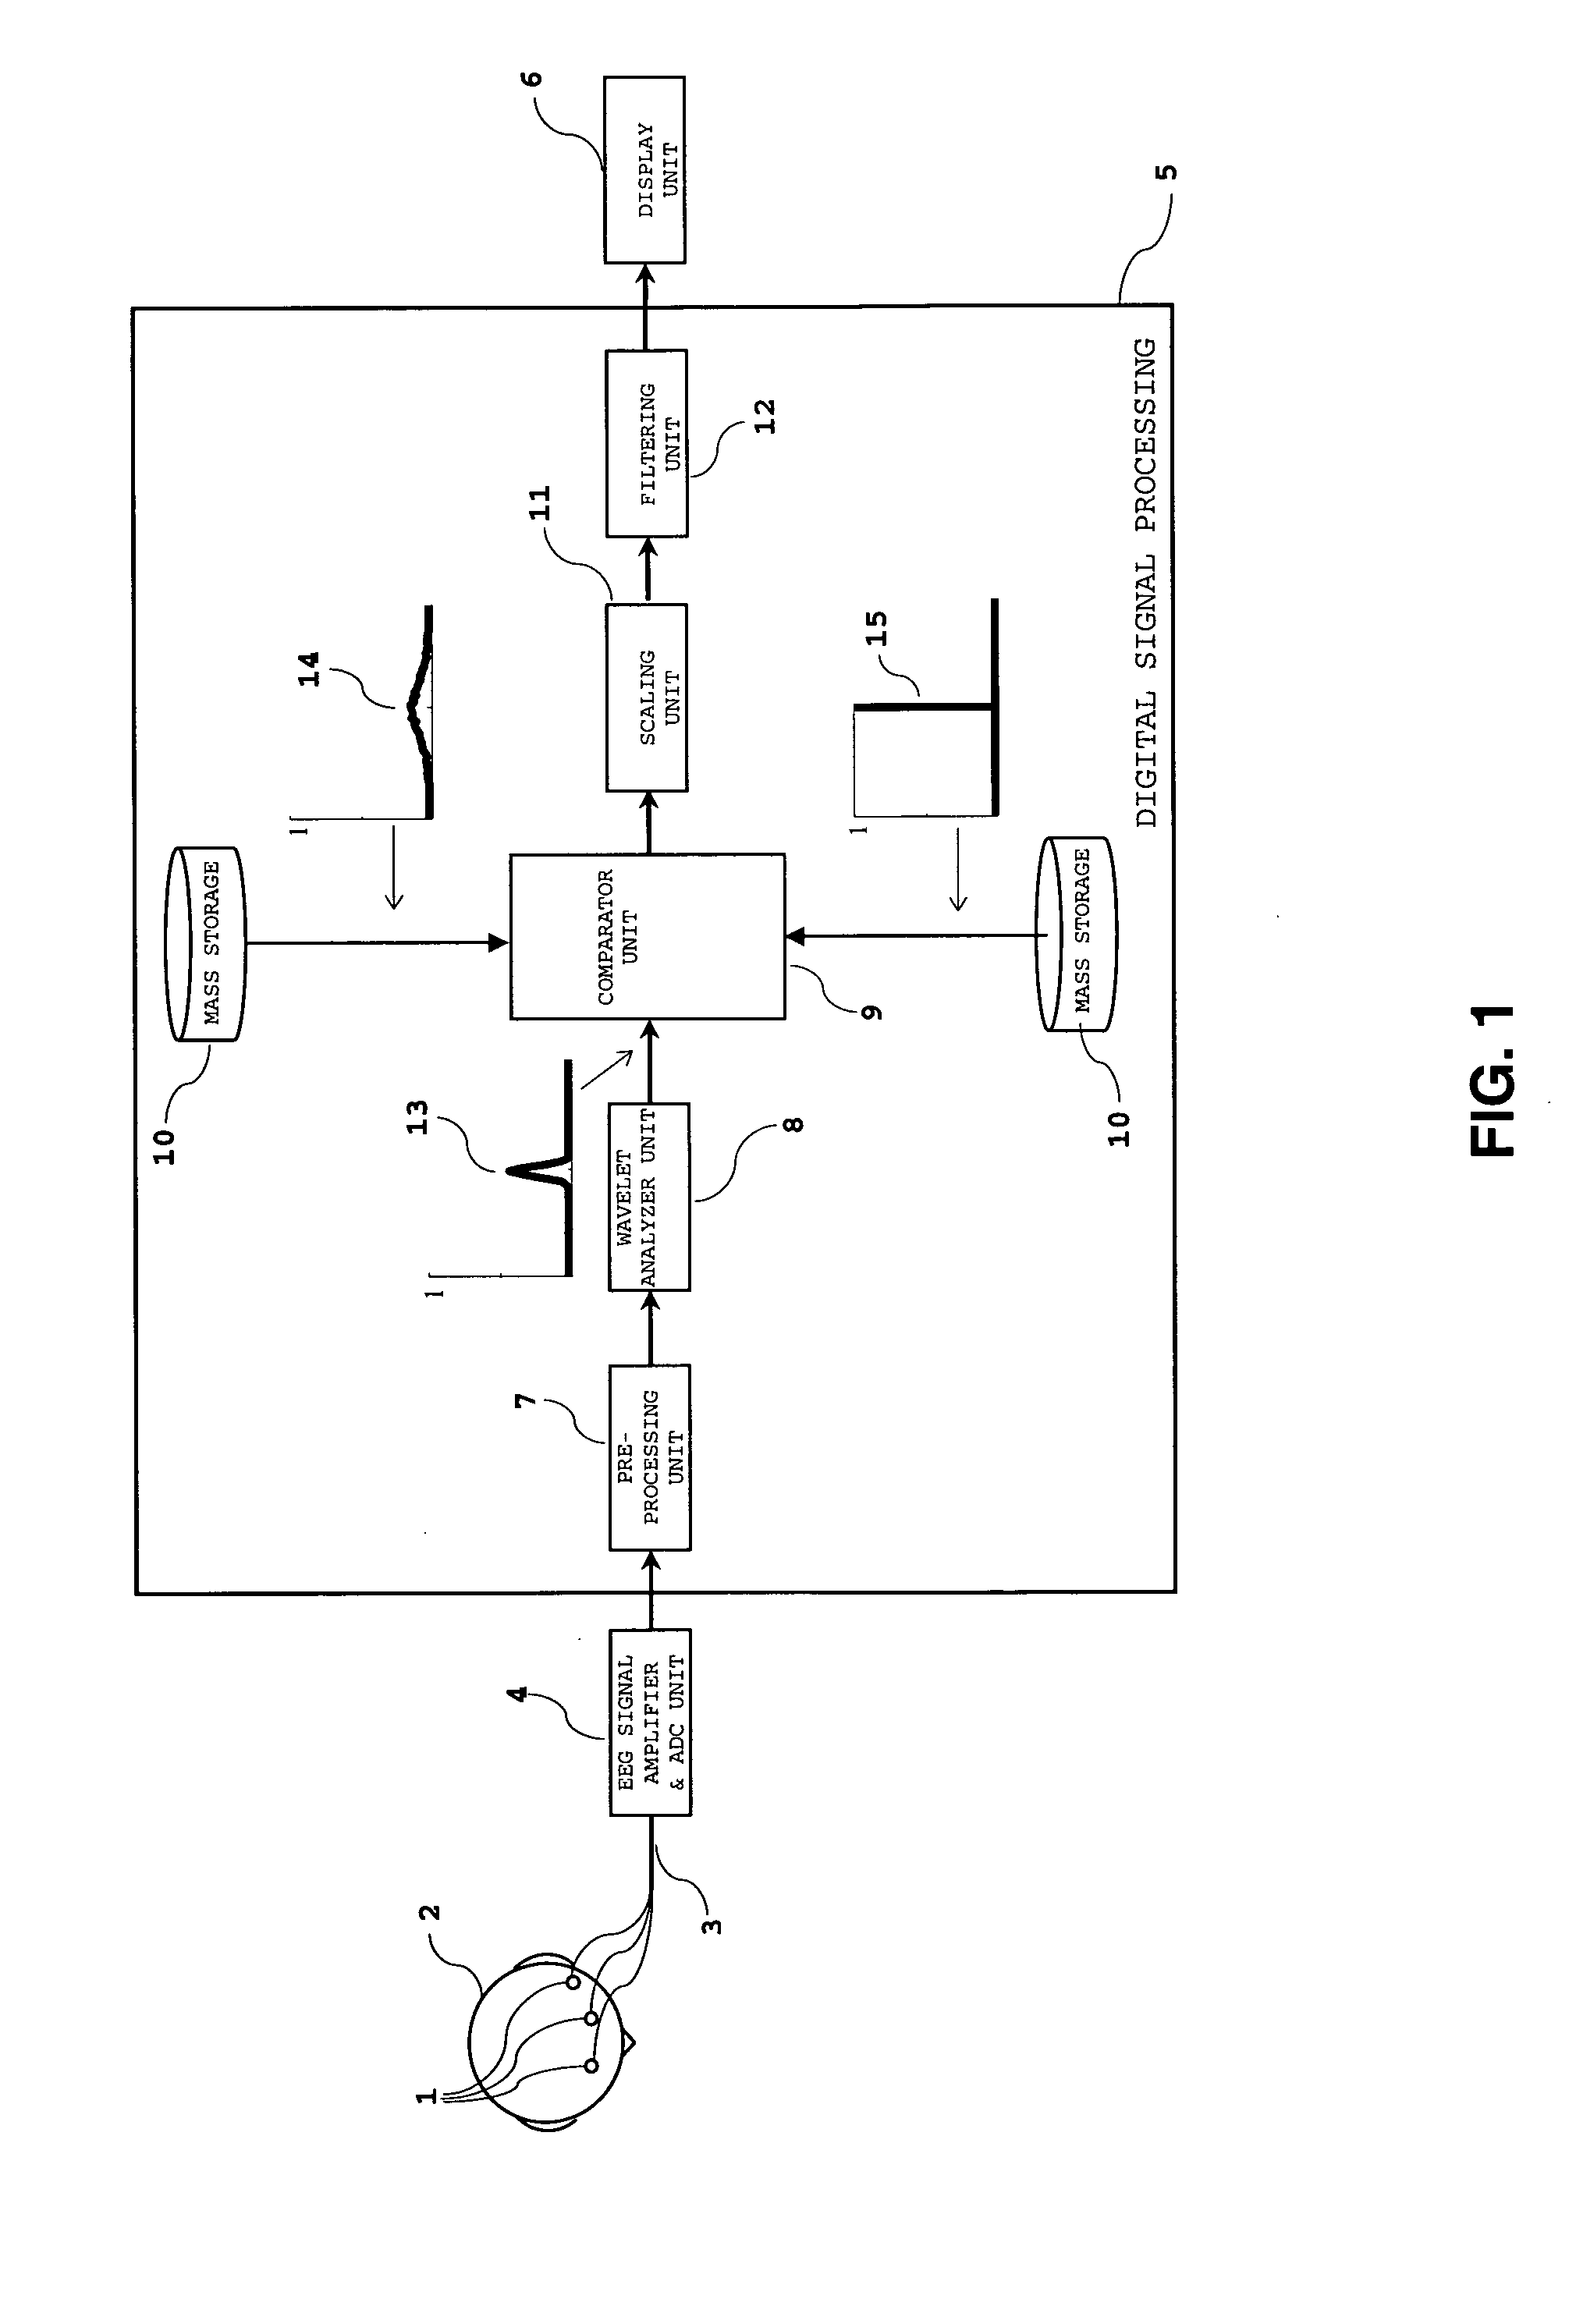 Method and apparatus for the estimation of anesthetic depth using wavelet analysis of the electroencephalogram